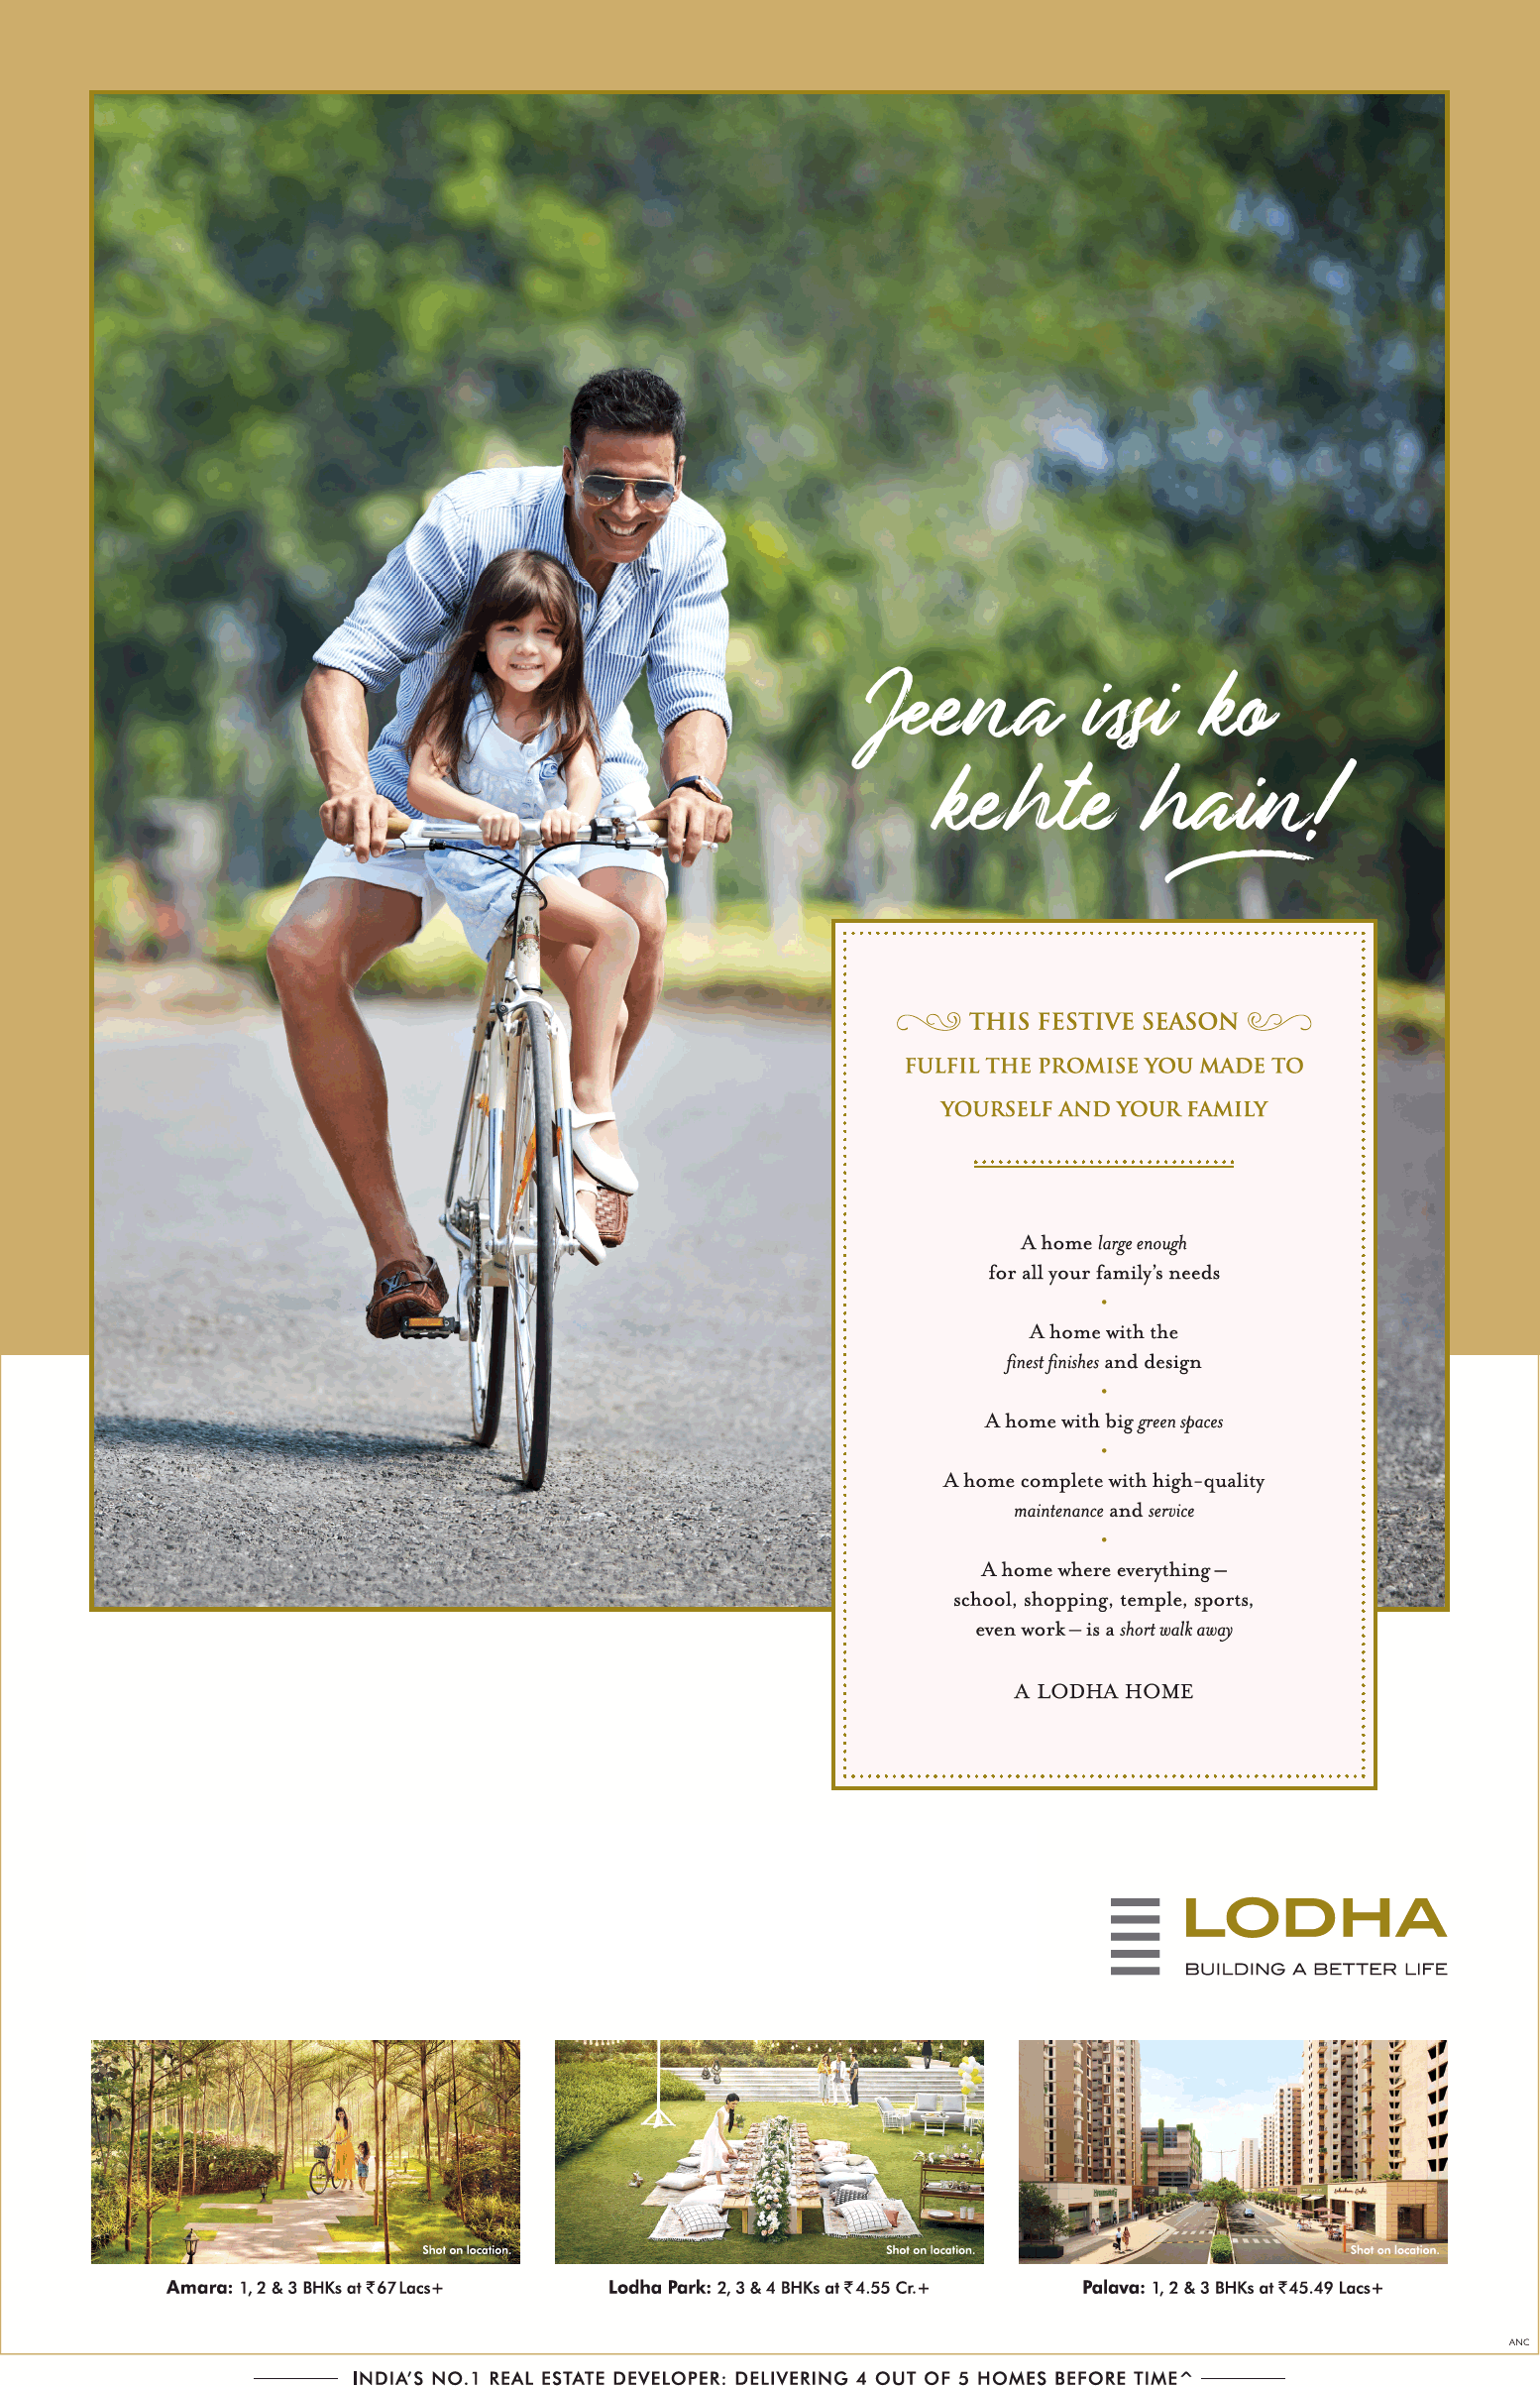 This festive season fulfill the promise you made to yourself and your family at Lodha Projects in Mumbai